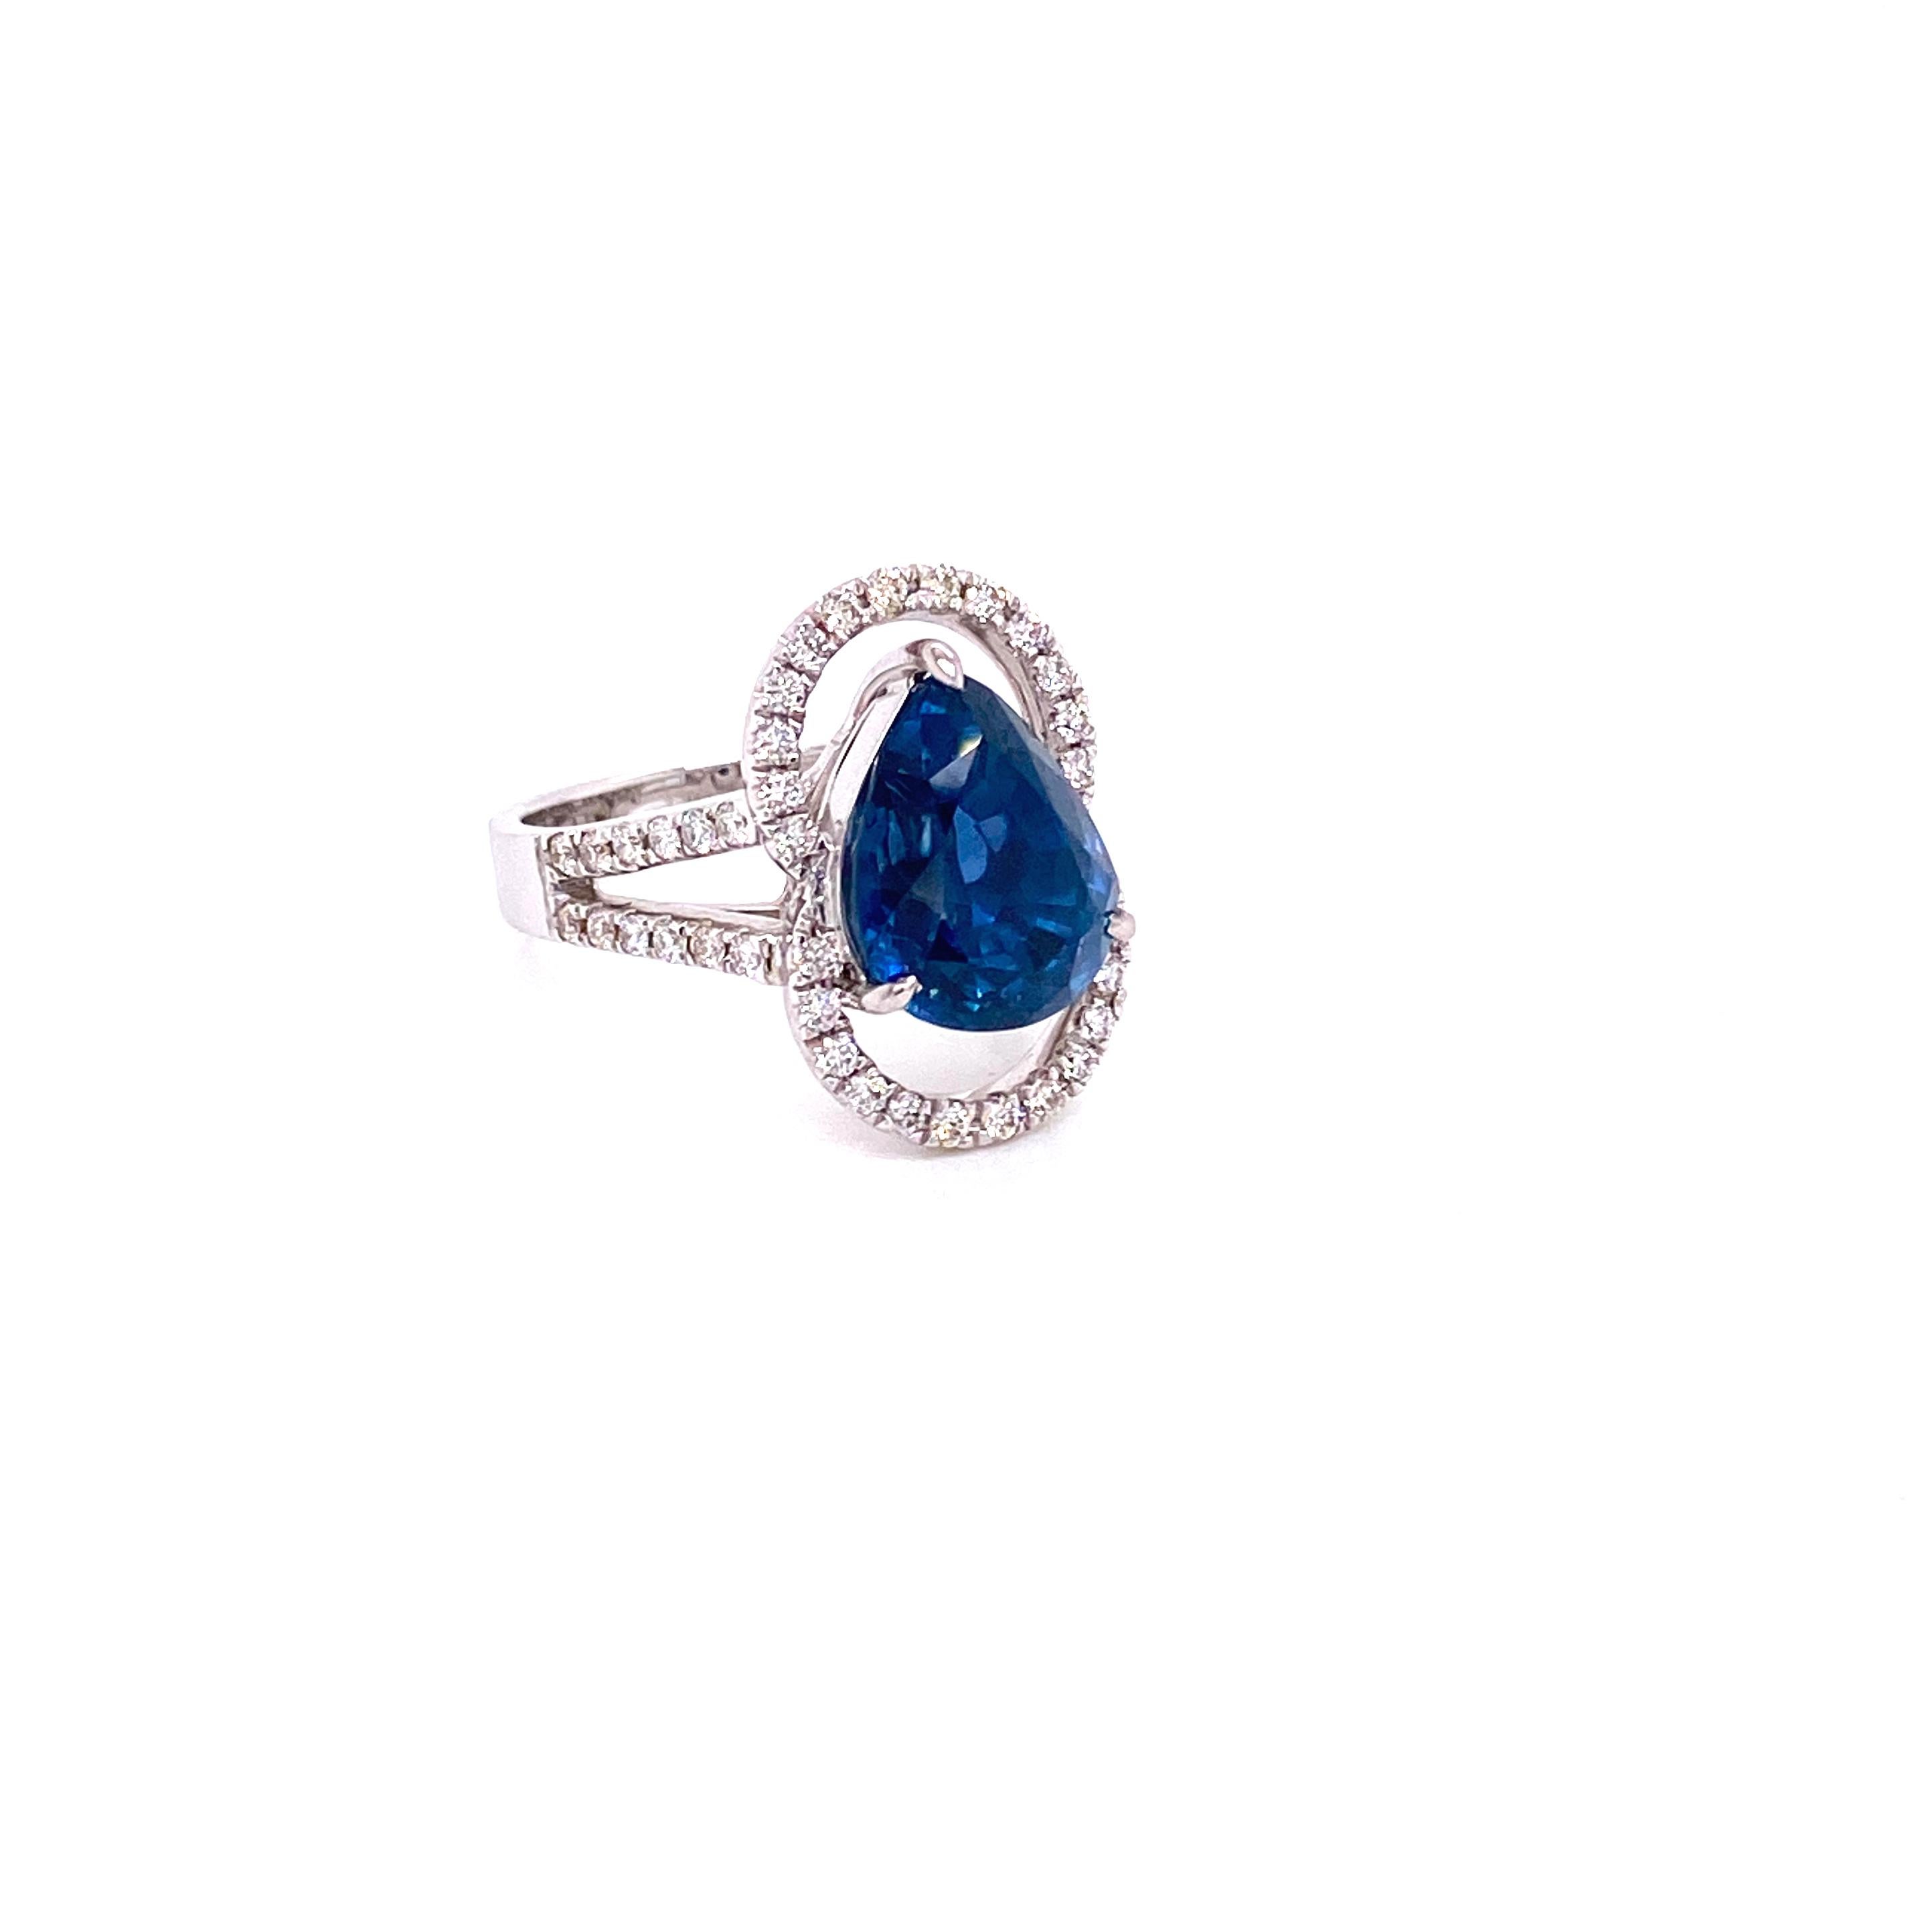 6.07 Carat GRS Certified Unheated Burmese Sapphire and Diamond Engagement Ring:

A rare and elegant ring, it features a beautiful GRS certified unheated Burmese pear-shaped blue sapphire weighing 6.07 carat, surrounded by white round brilliant